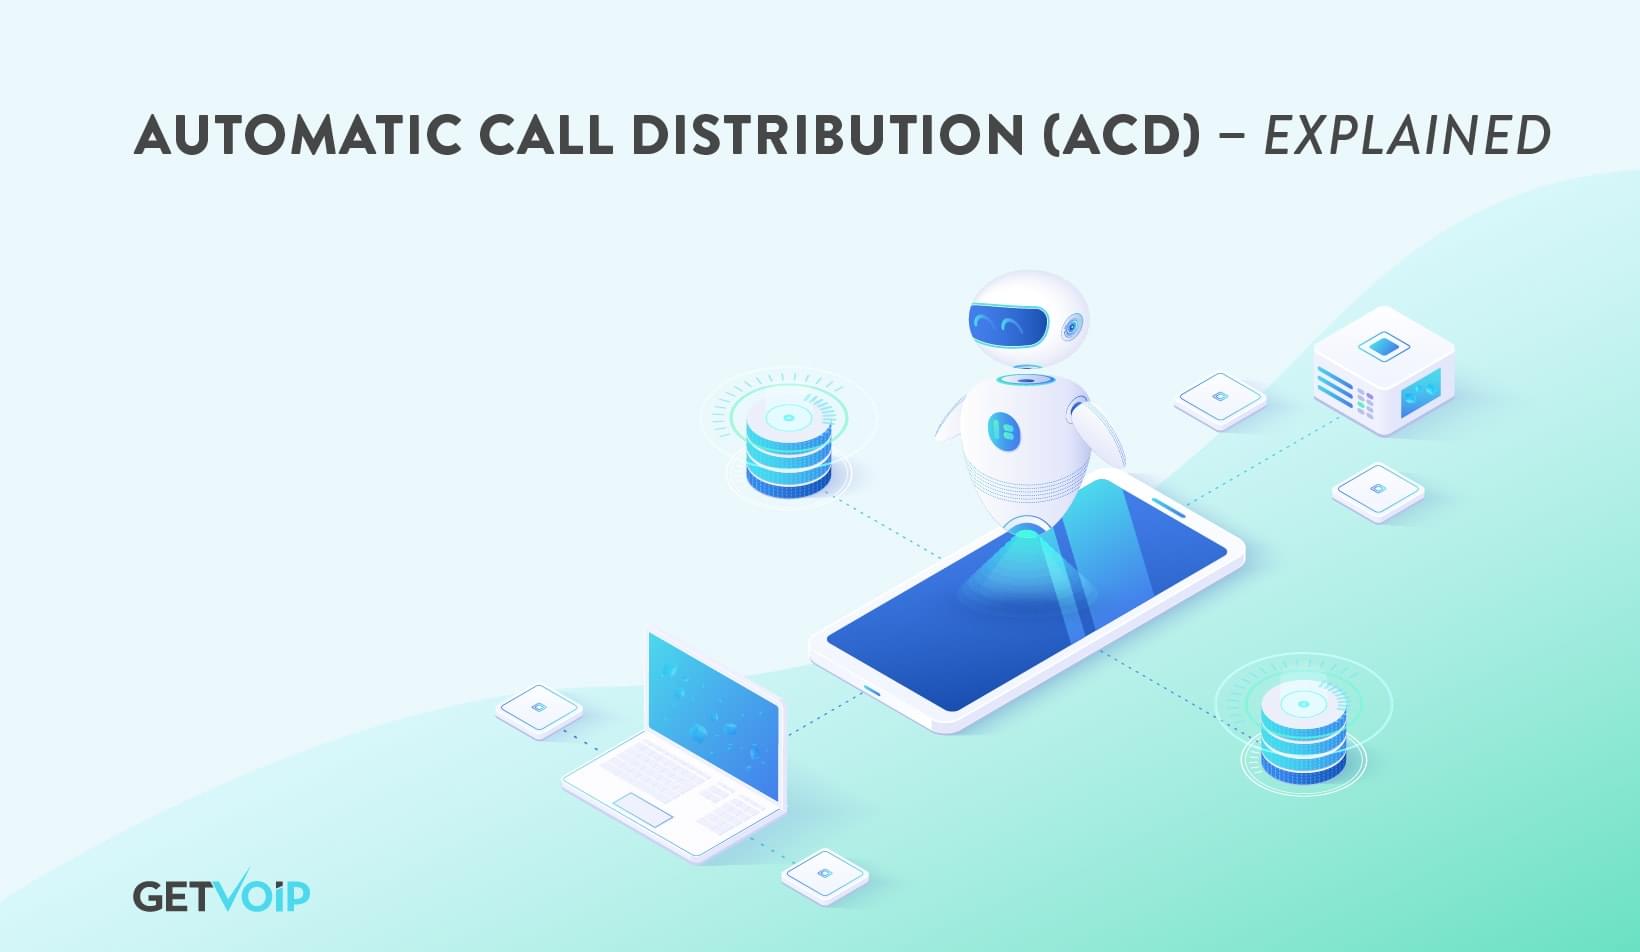 What is Automatic Call Distribution?